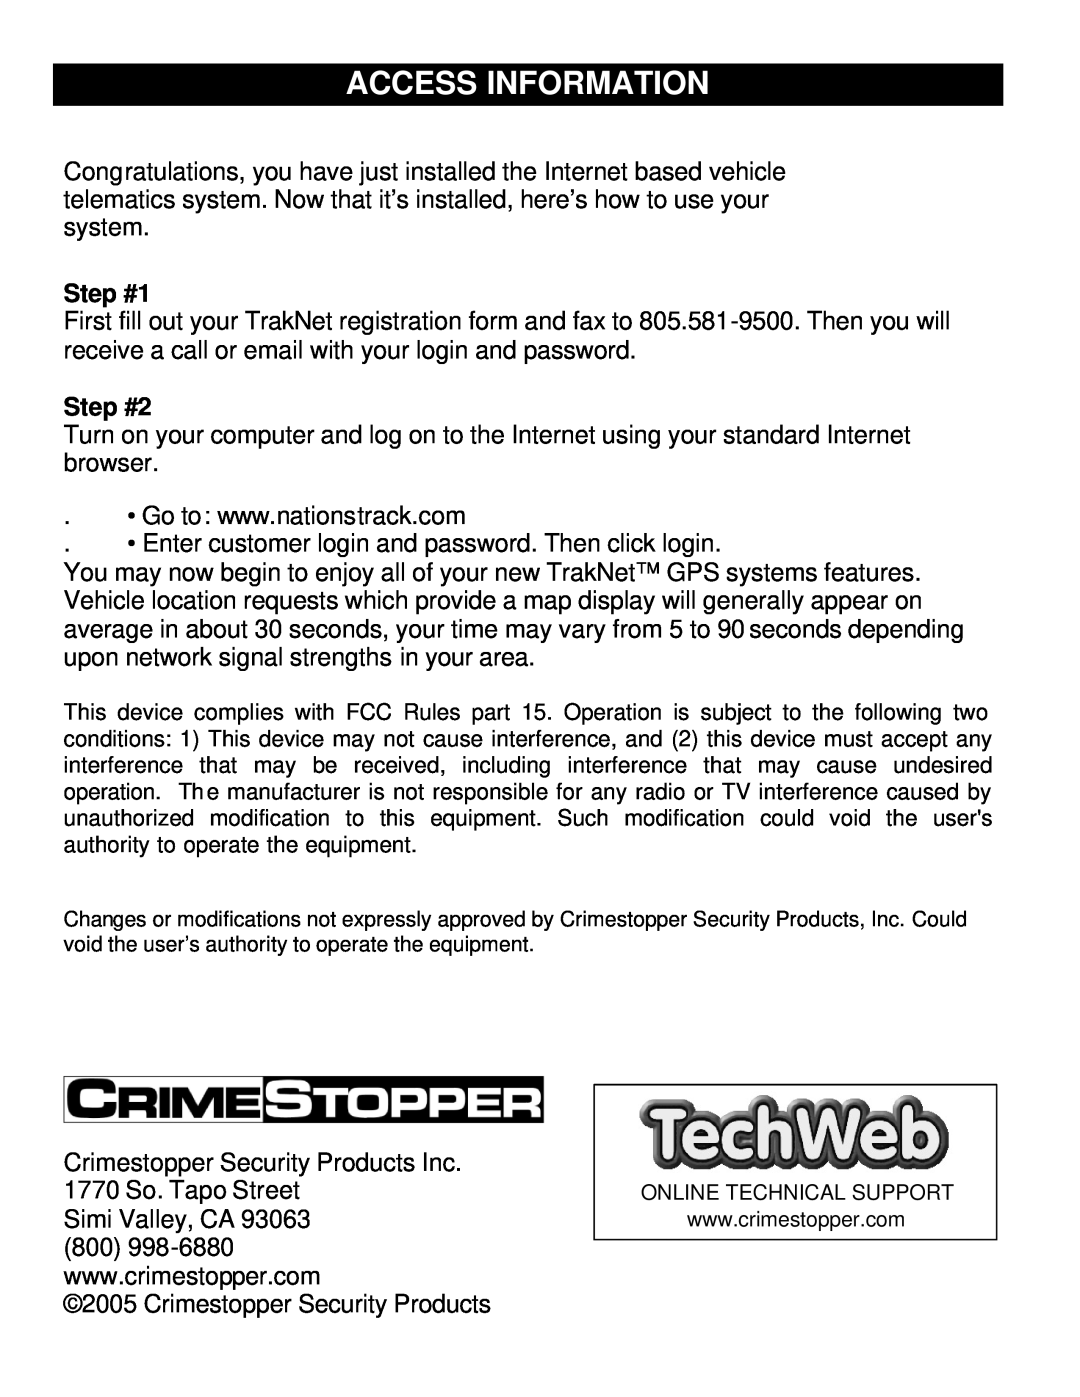 Crimestopper Security Products TN-4004, TN-4003 installation instructions Access Information, Step #1, Step #2 